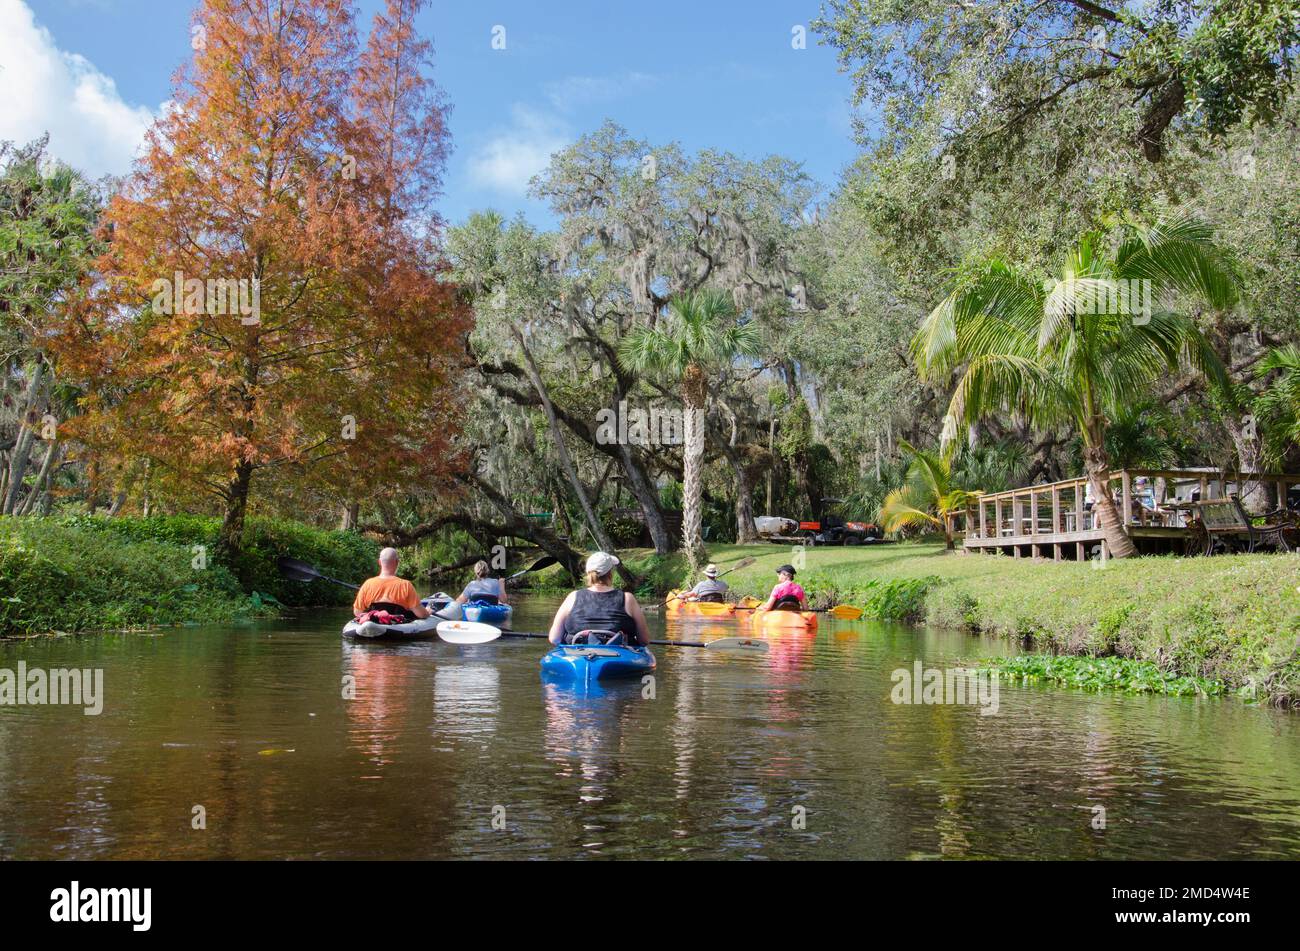 Kayakers on Frog Creek at the Frog Creek Campground in Palmetto, Florida, USA Stock Photo